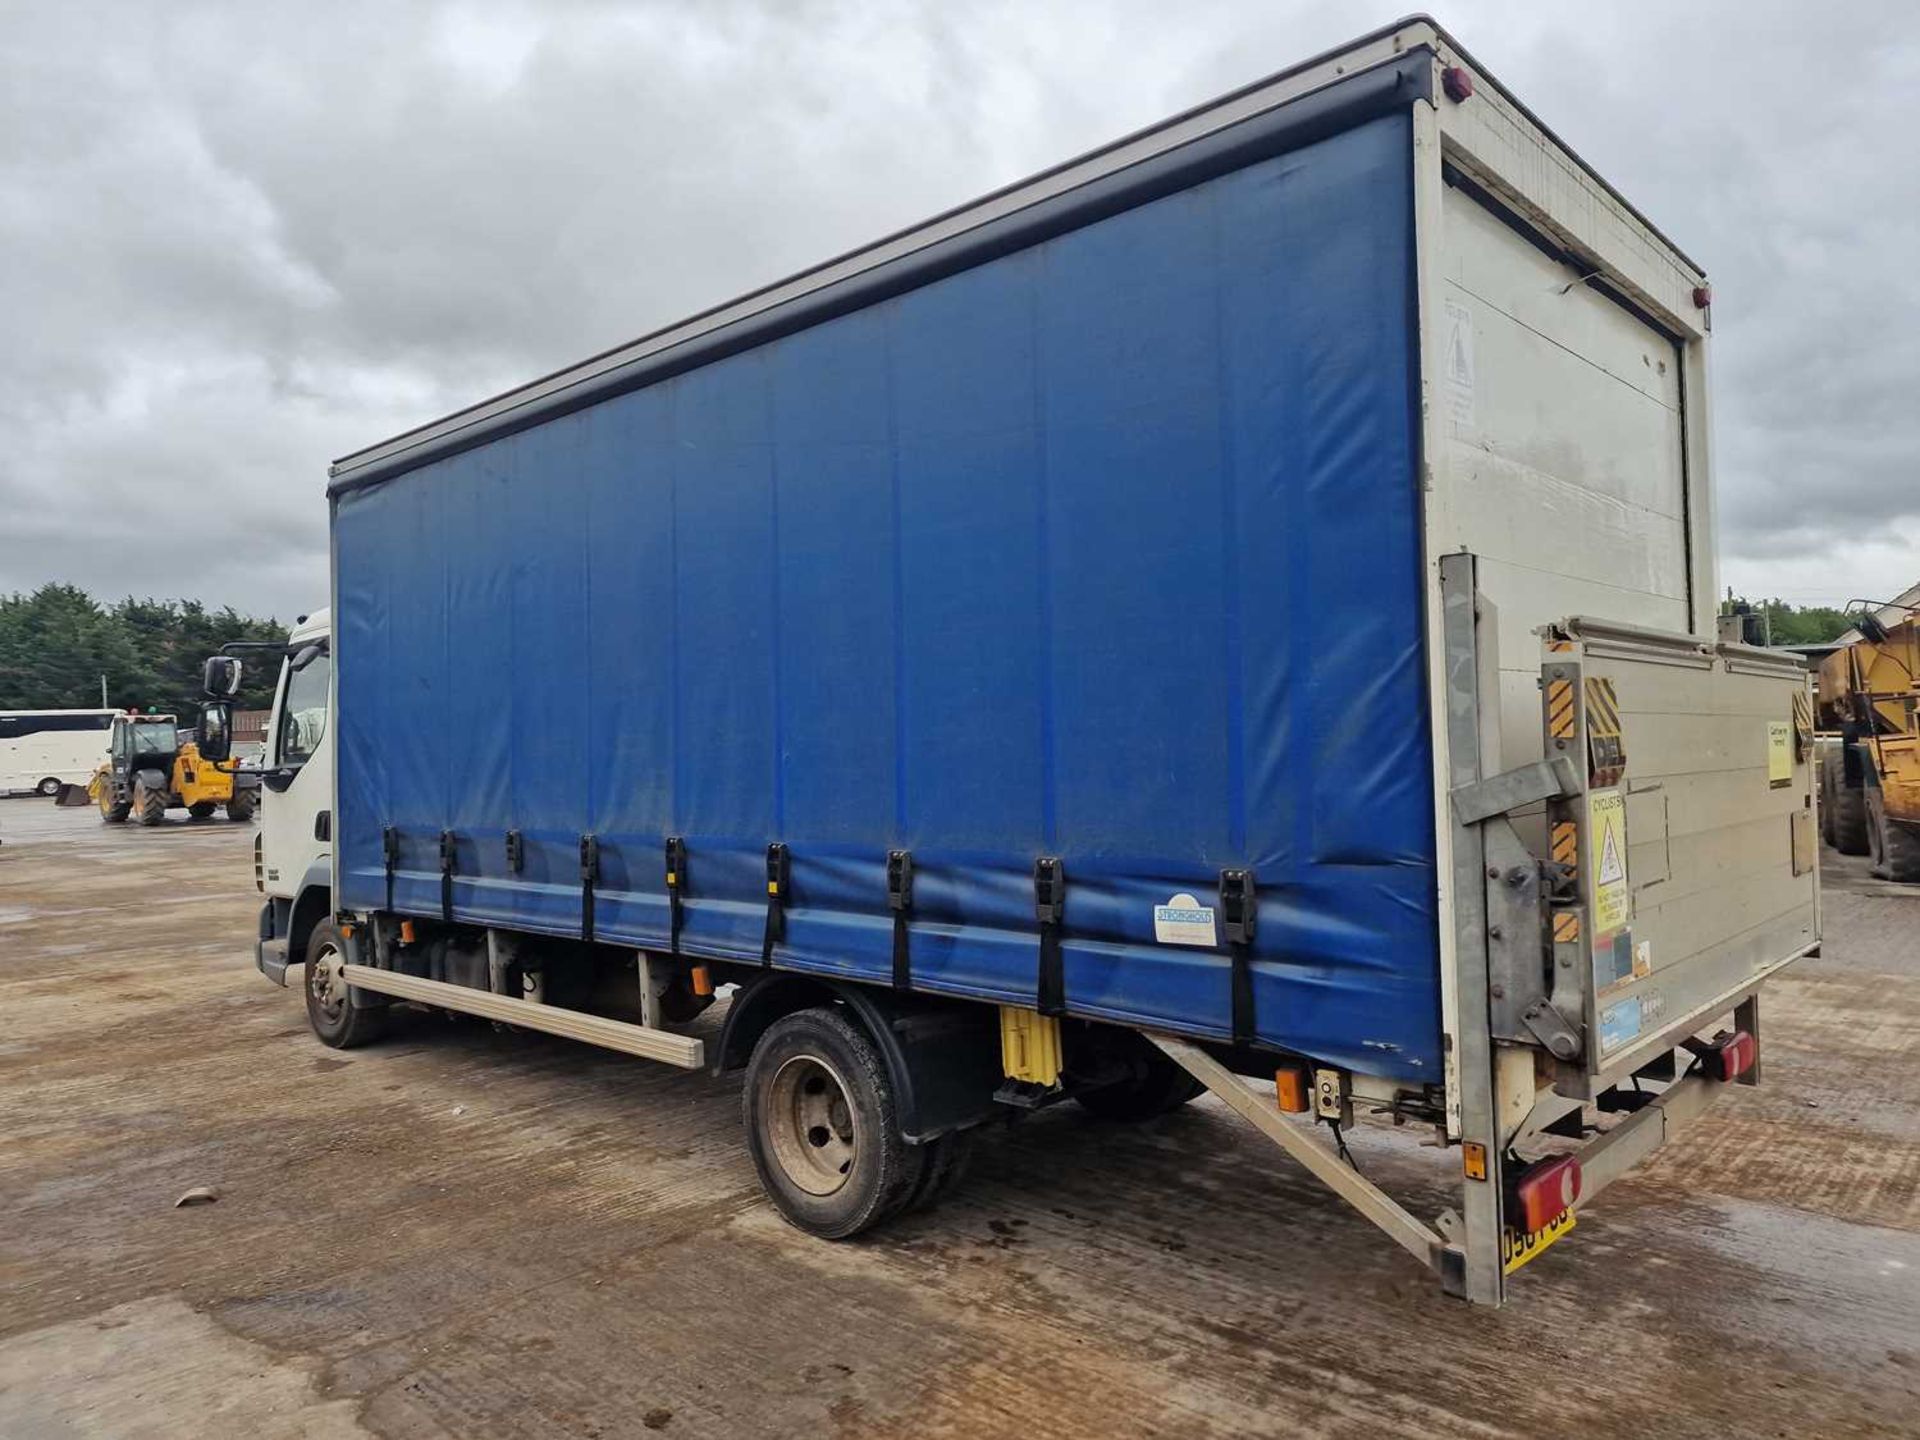 2006 DAF LF45.160 4x2 Curtainsider Lorry, Tailgate, Manual Gear Box (Reg. Docs. Available) - Image 23 of 40